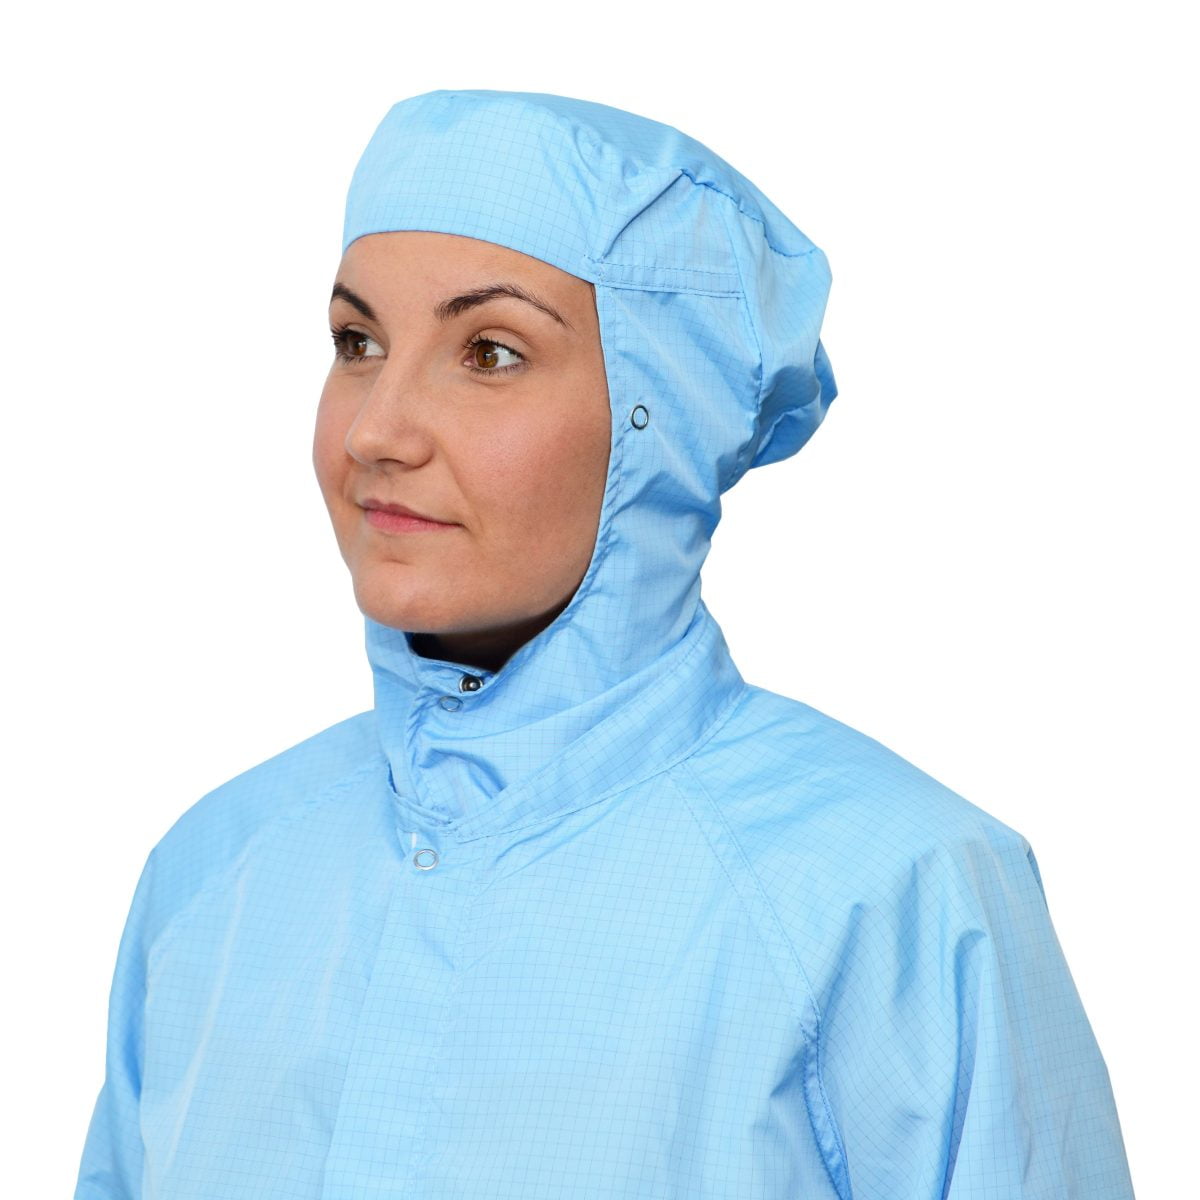 Permanent hood and shoulders - Integrity Cleanroom